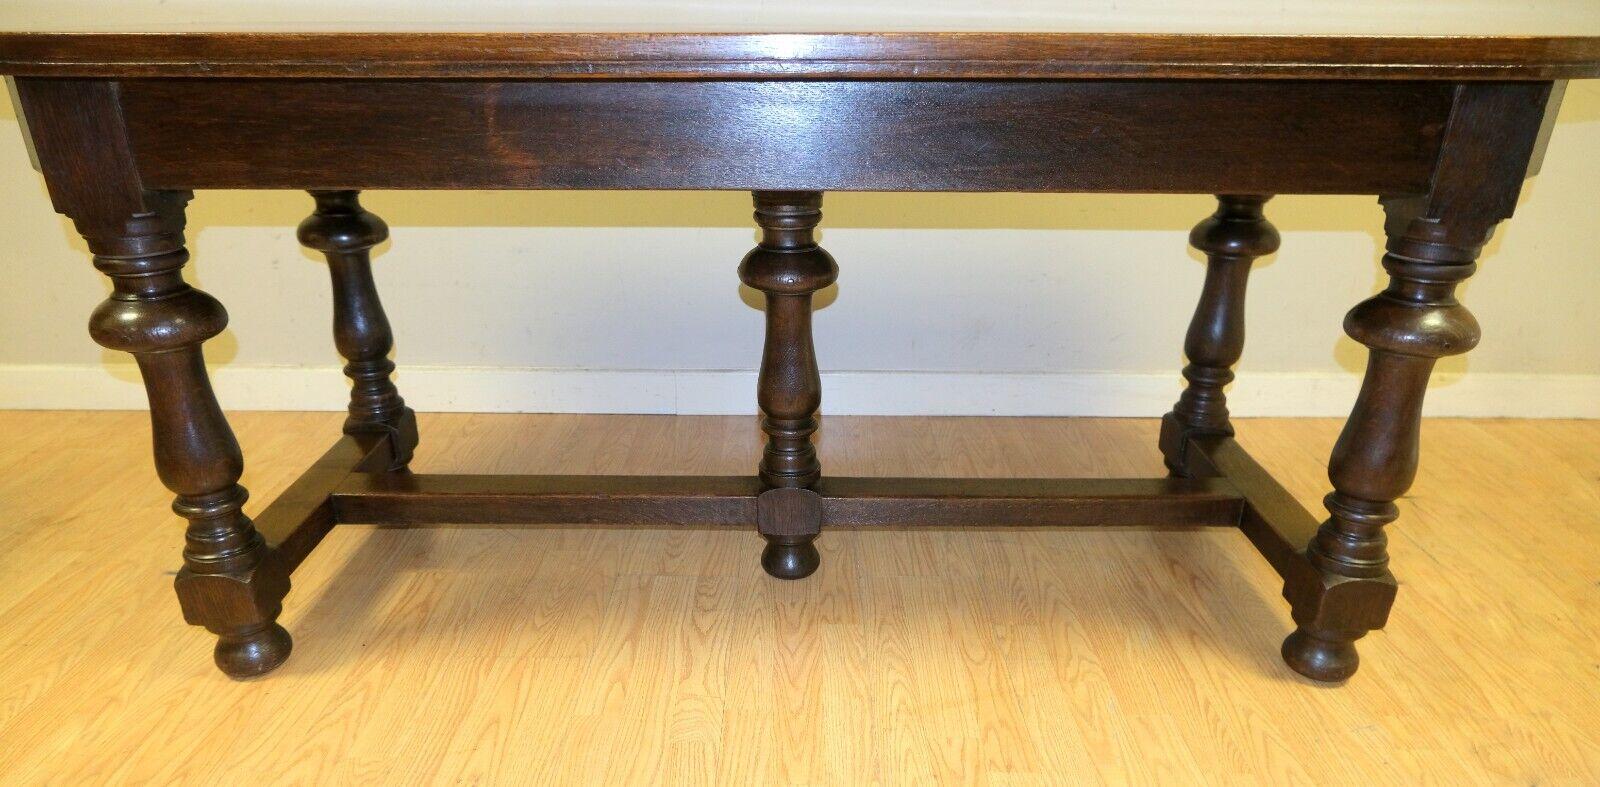 Hand-Crafted Gorgeous 19th Century Solid Oak Hall Refectory Dining Table on Thick Turned Legs